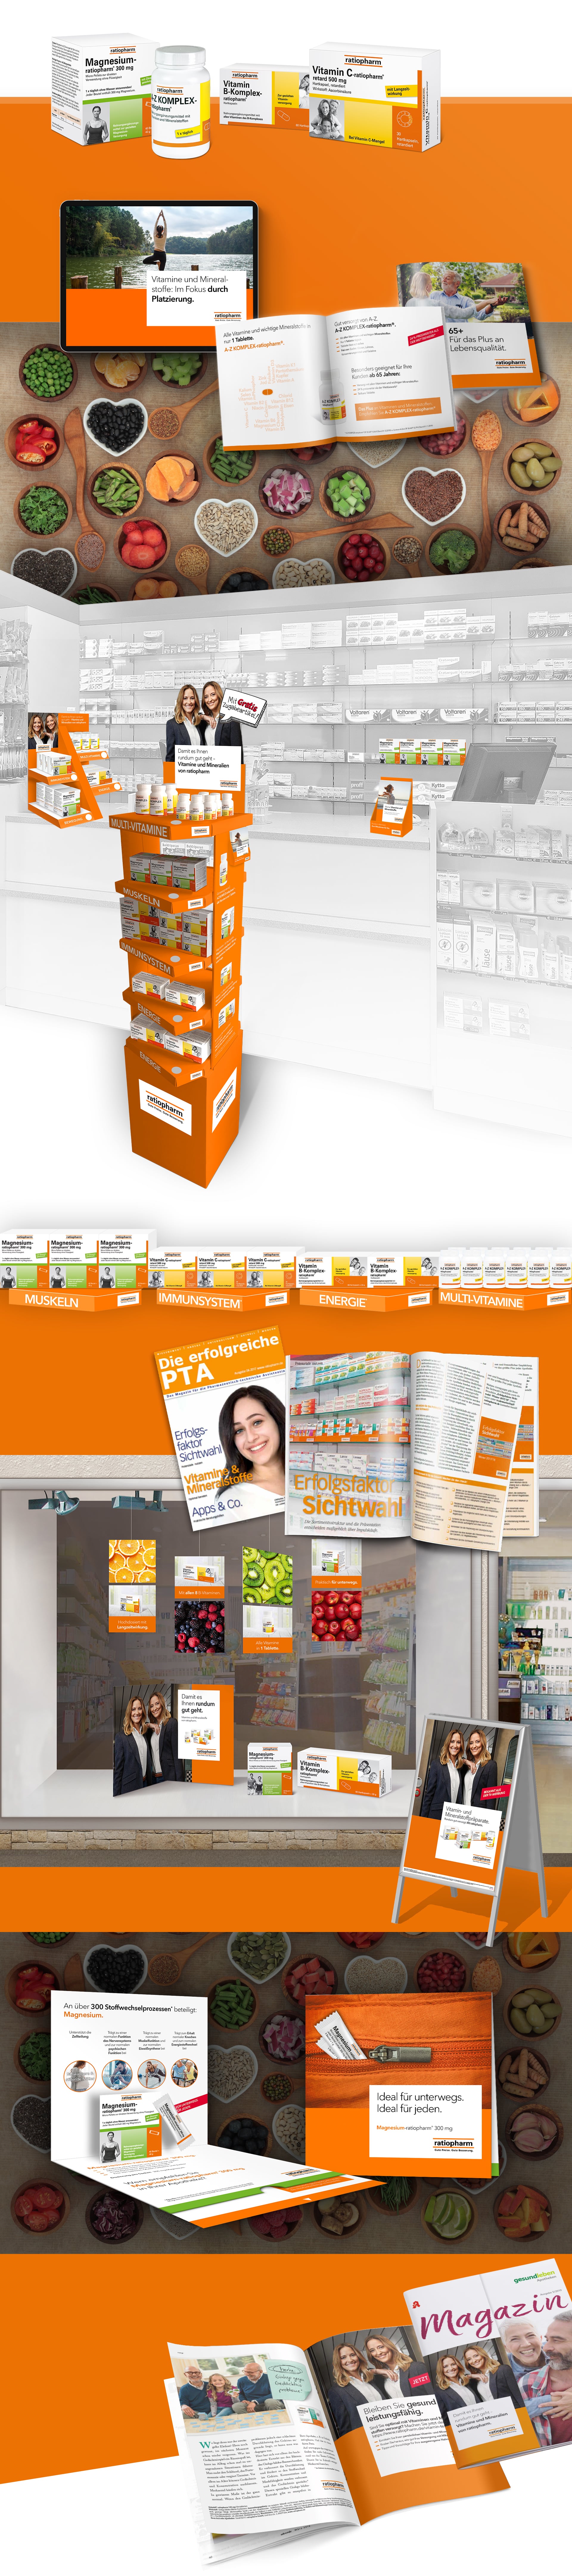 Case ratiopharm Vitamins and minerals